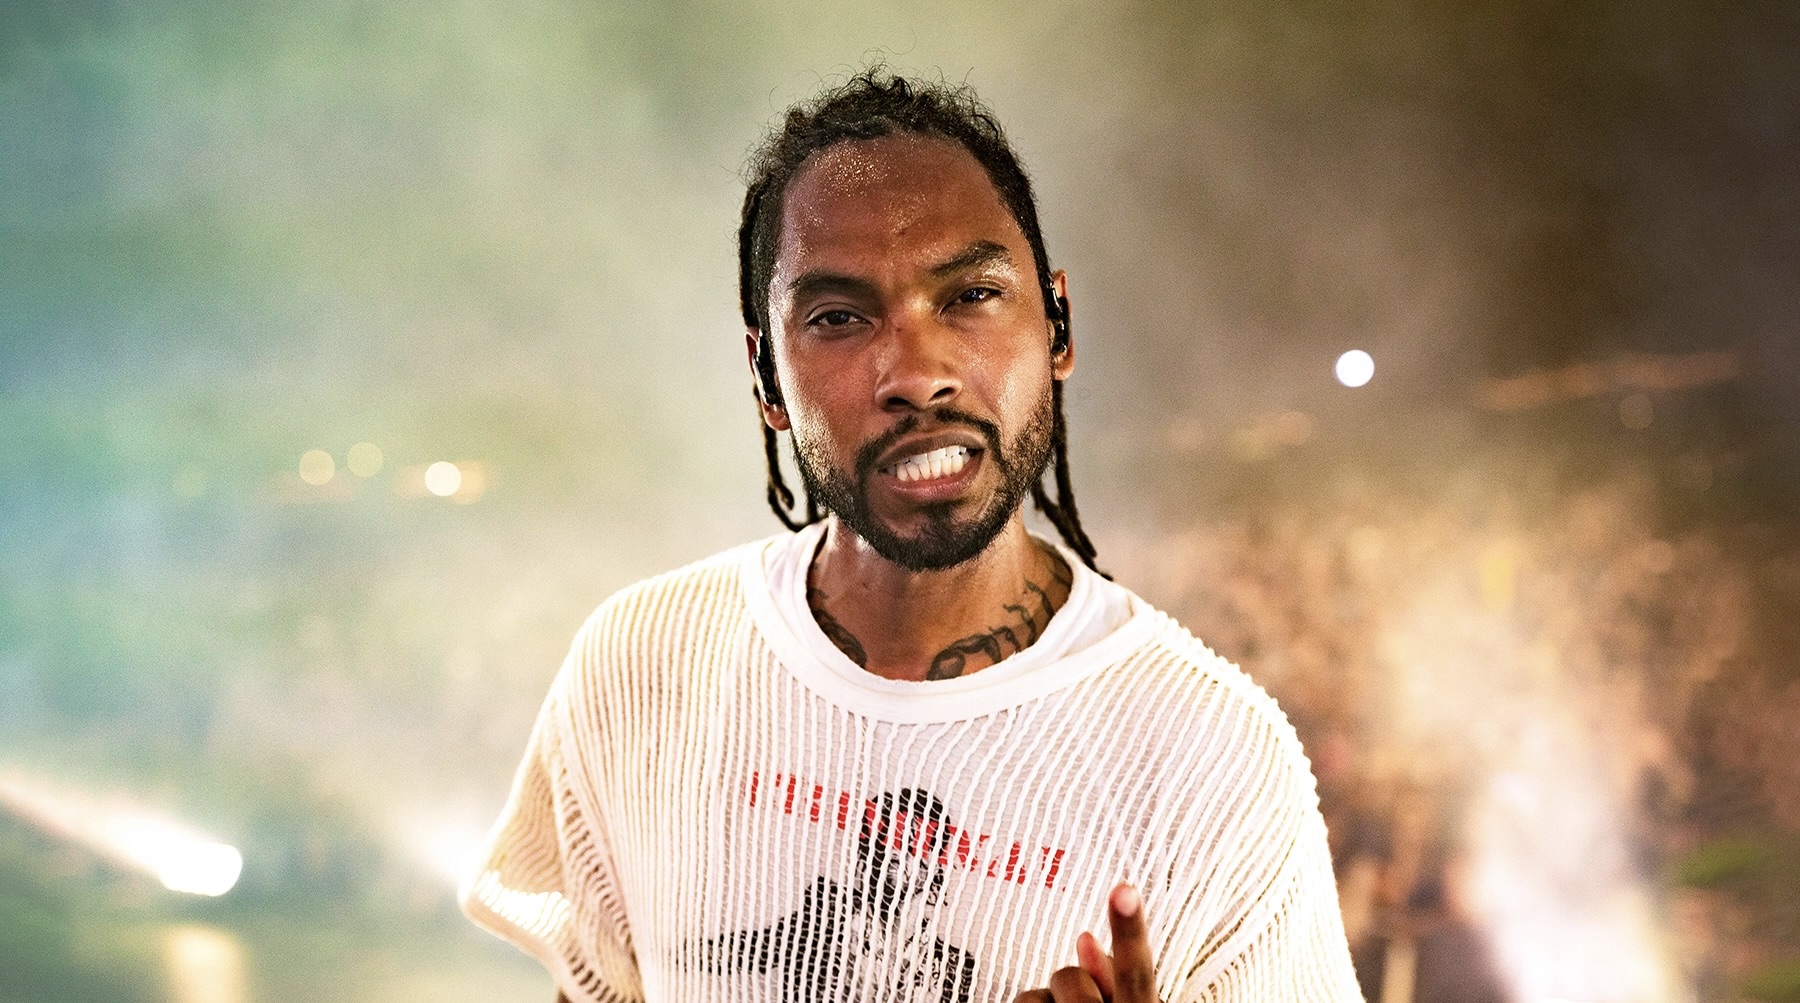 Miguel Performed A New Song, ‘Rope,’ While Hanging From Literal Rope Hooks In His Skin [Video]